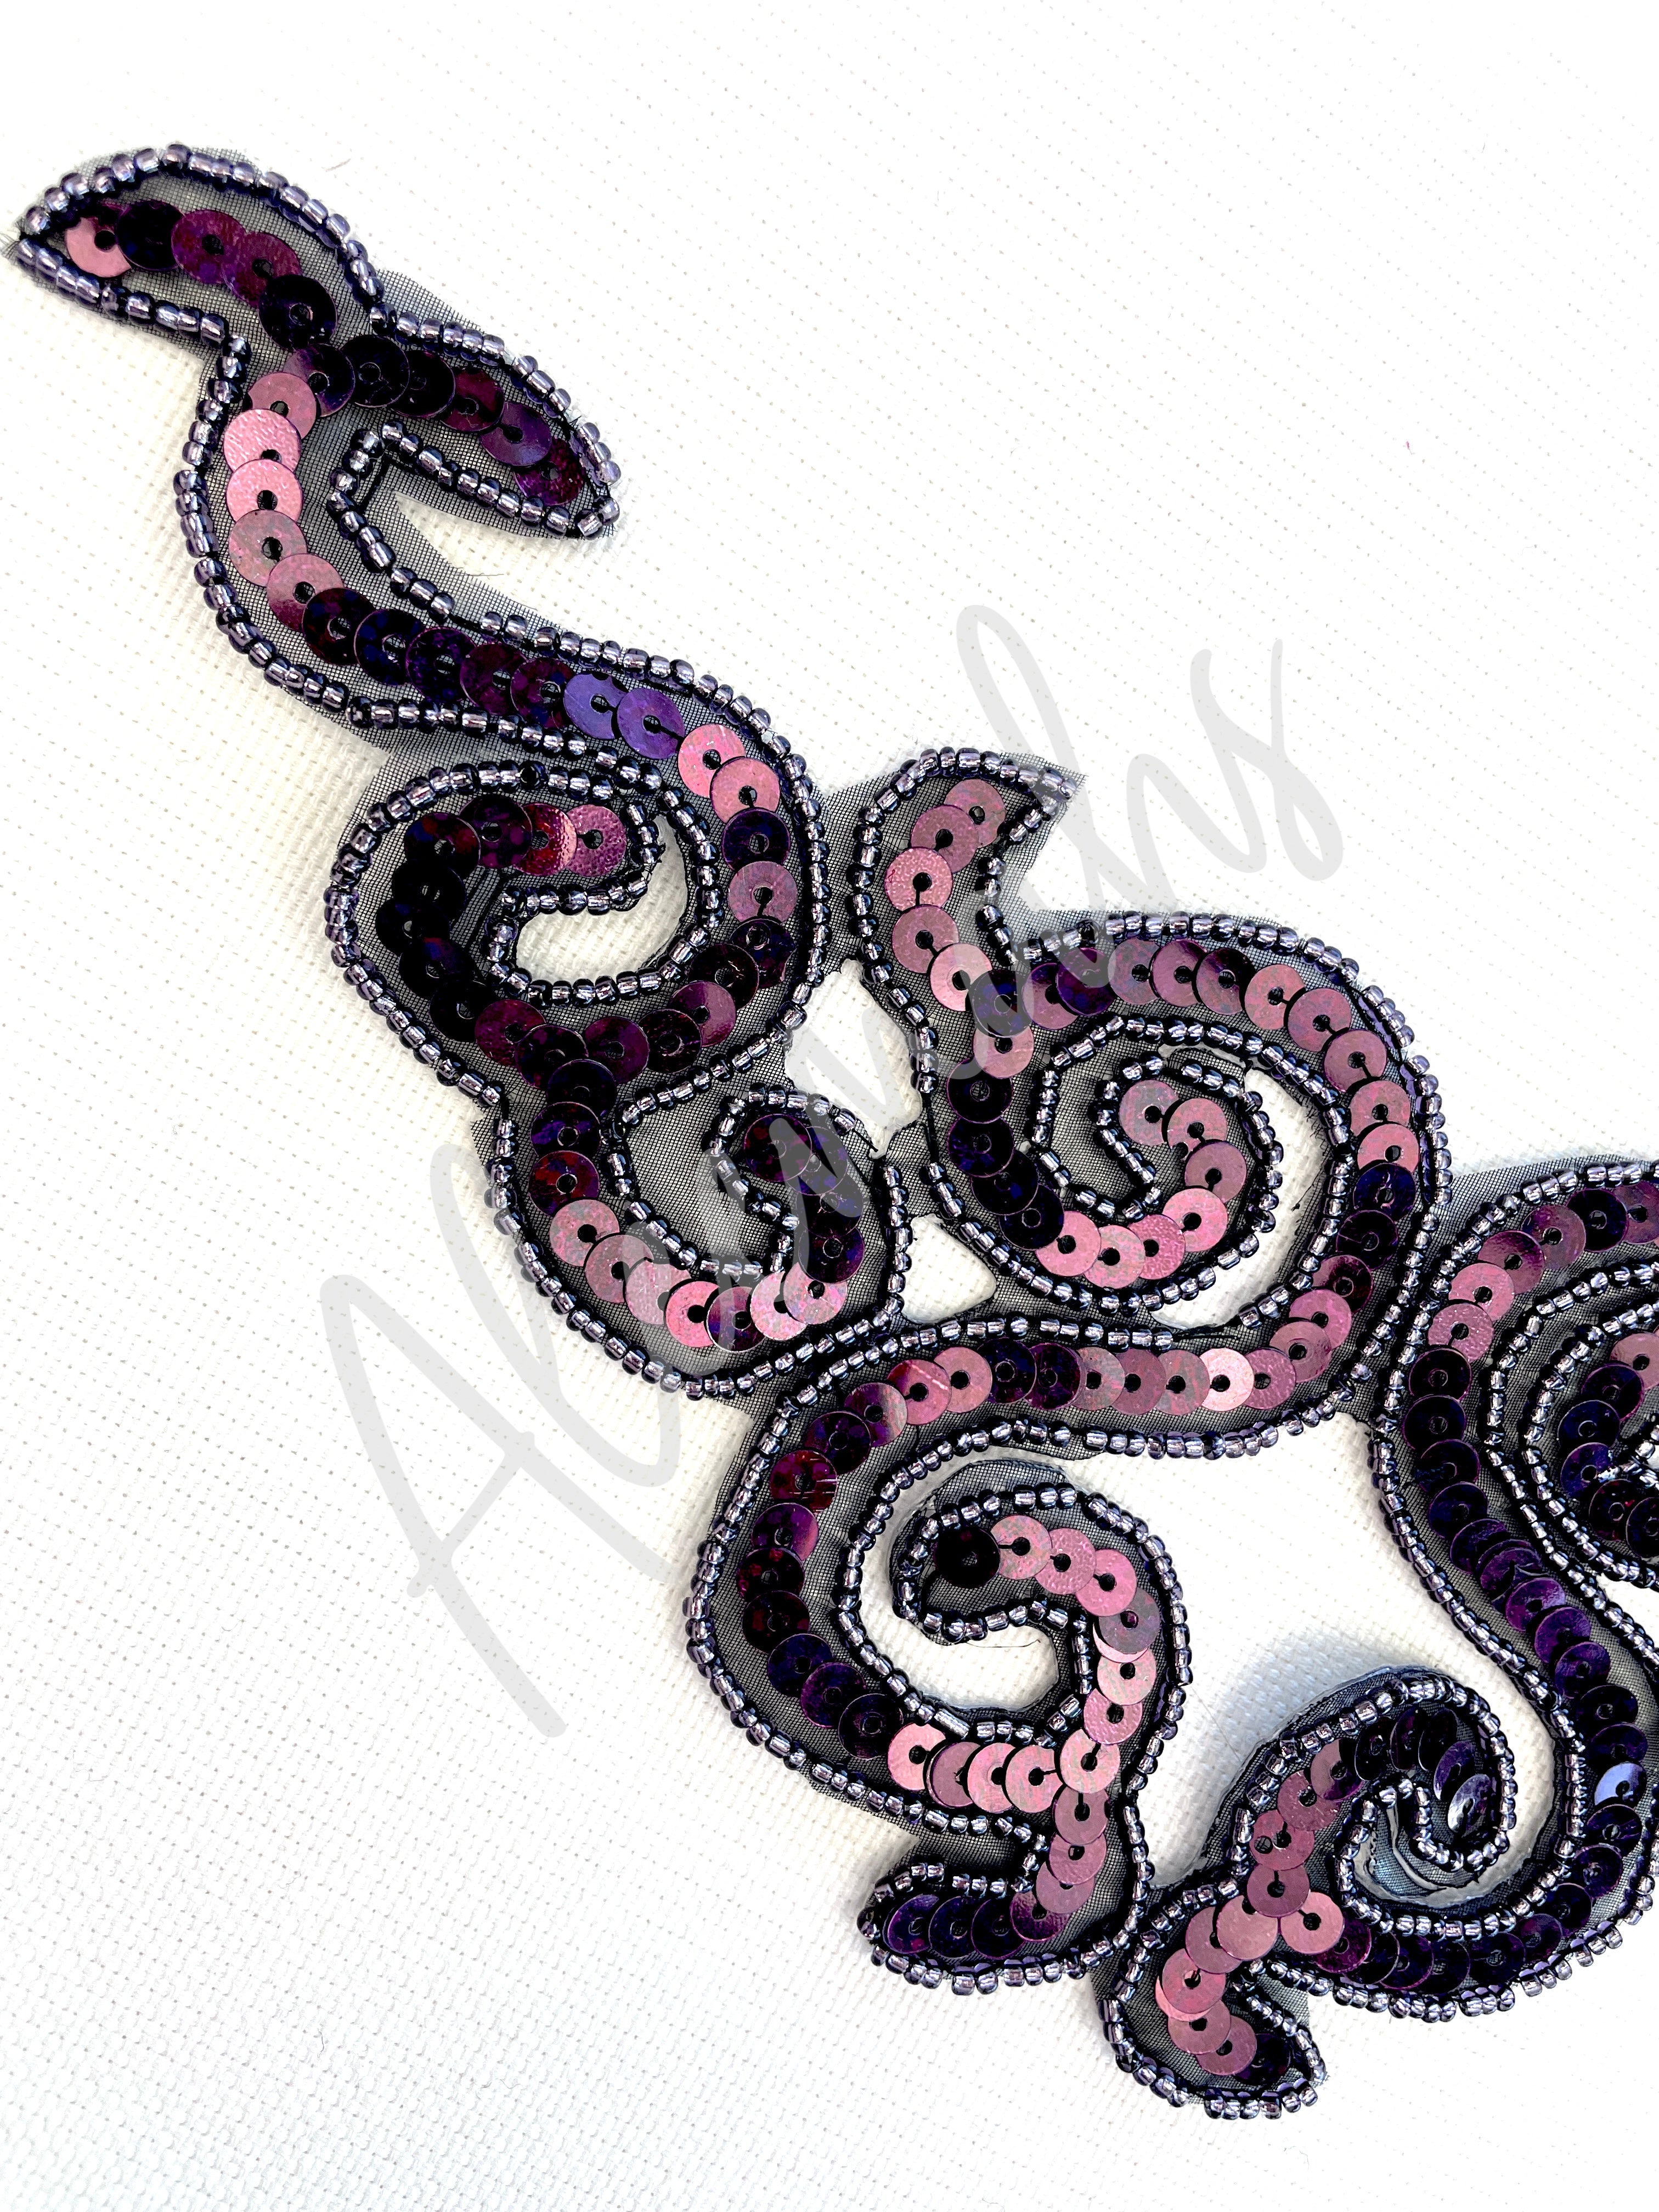 A-107: Burgundy sequin and bead applique